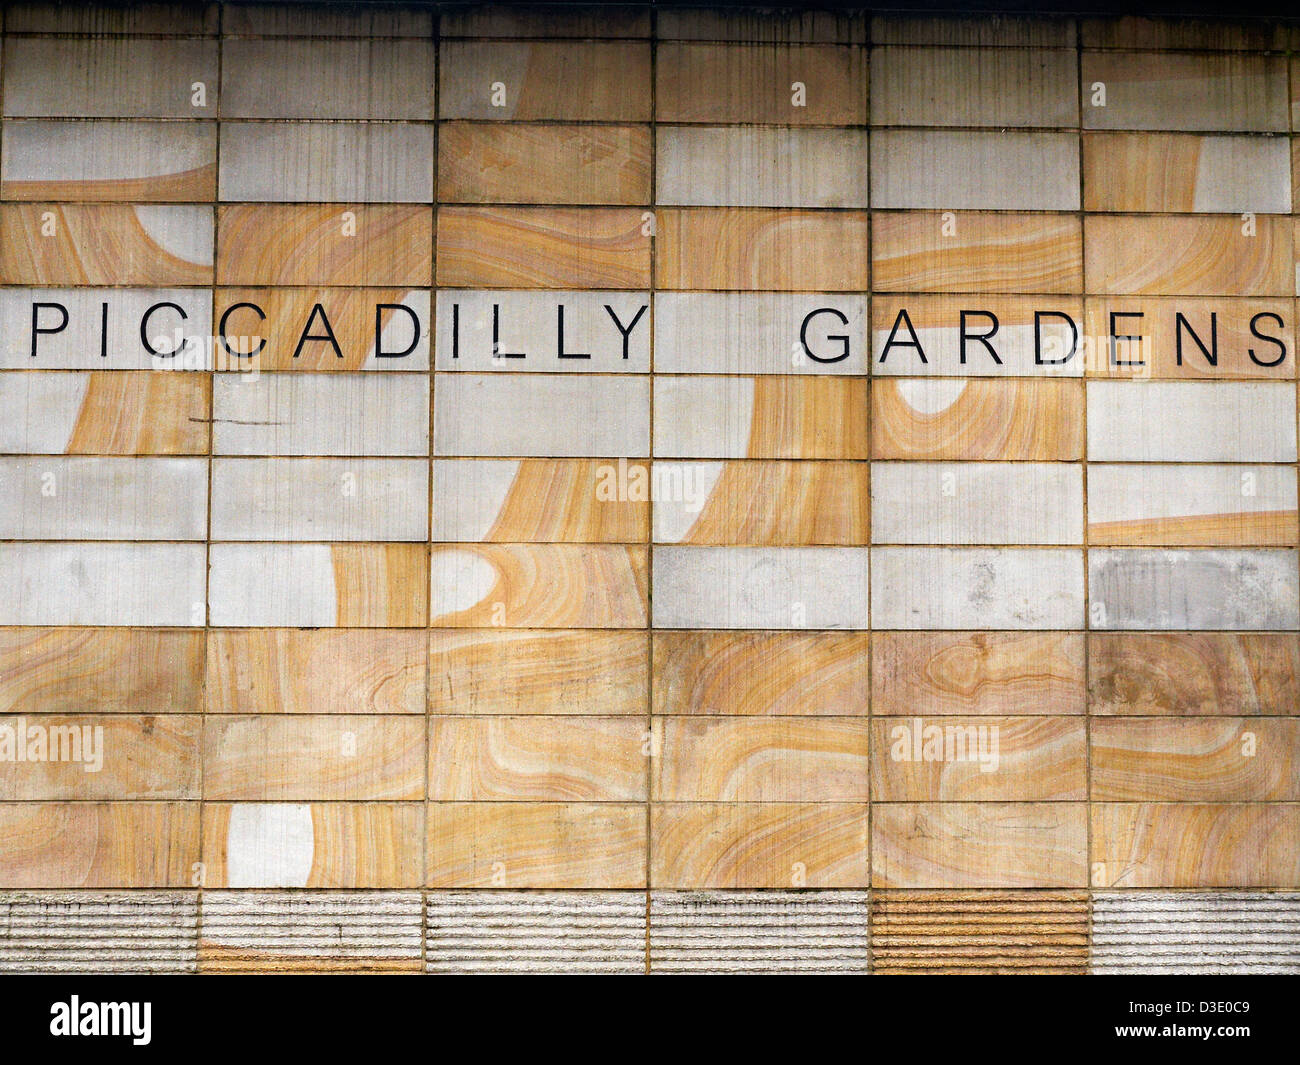 Piccadilly Gardens sign on wall Manchester UK Stock Photo